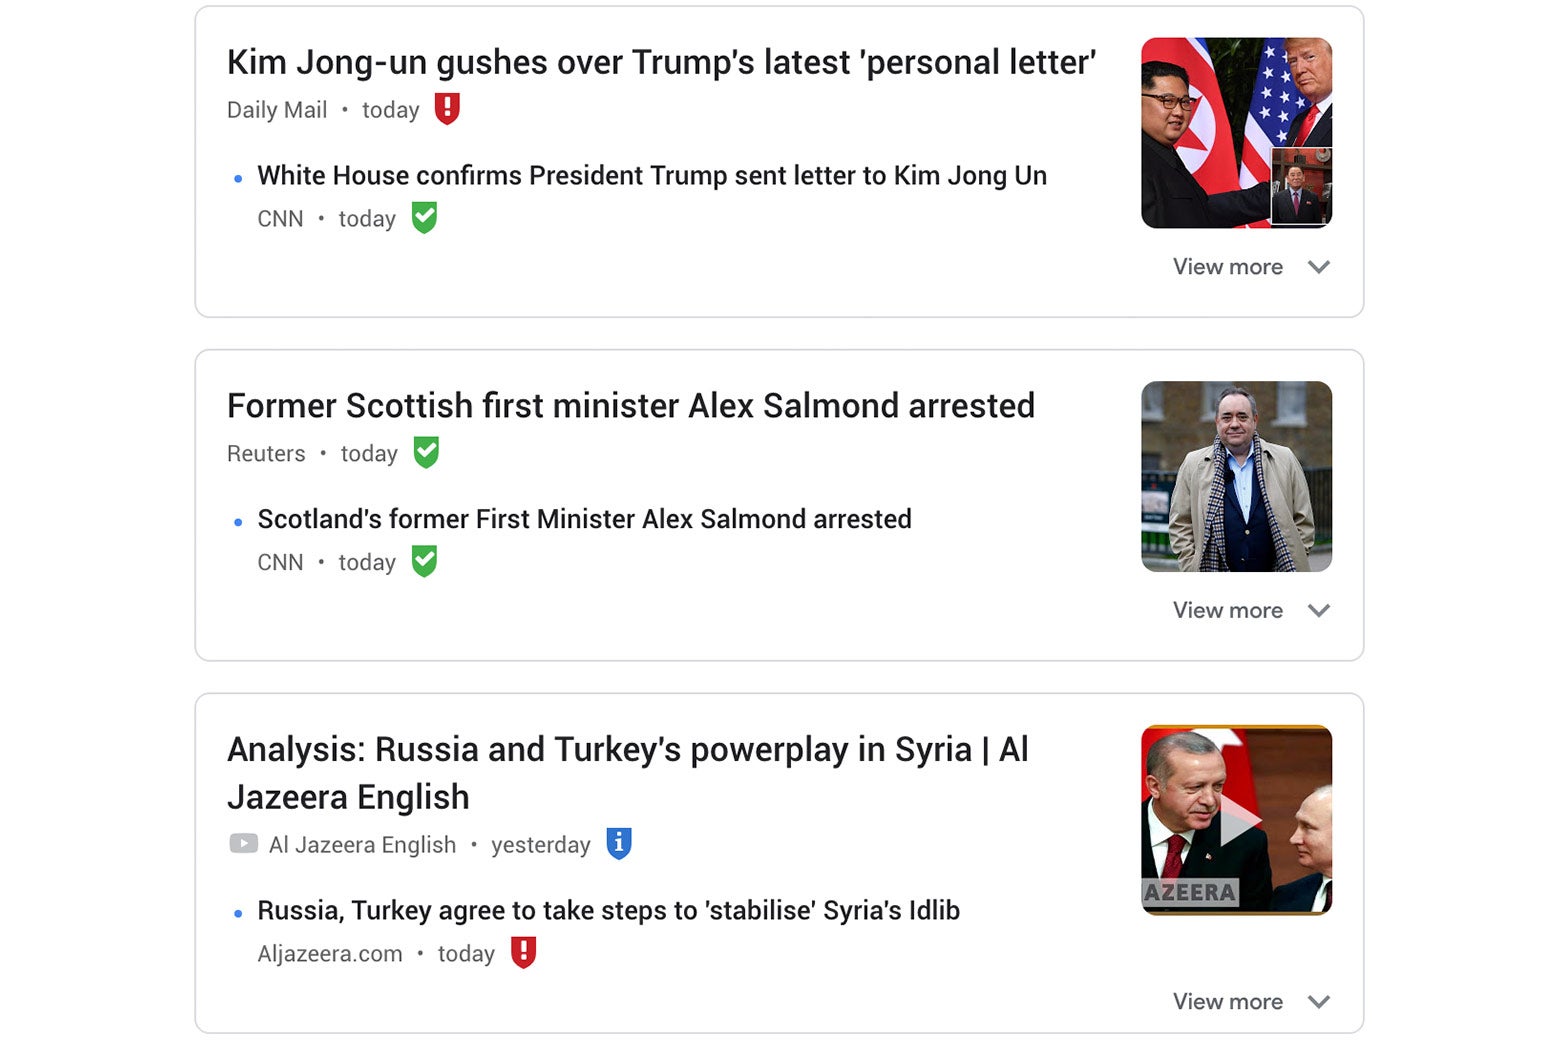 Links to news outlets in a browser with the NewsGuard extension